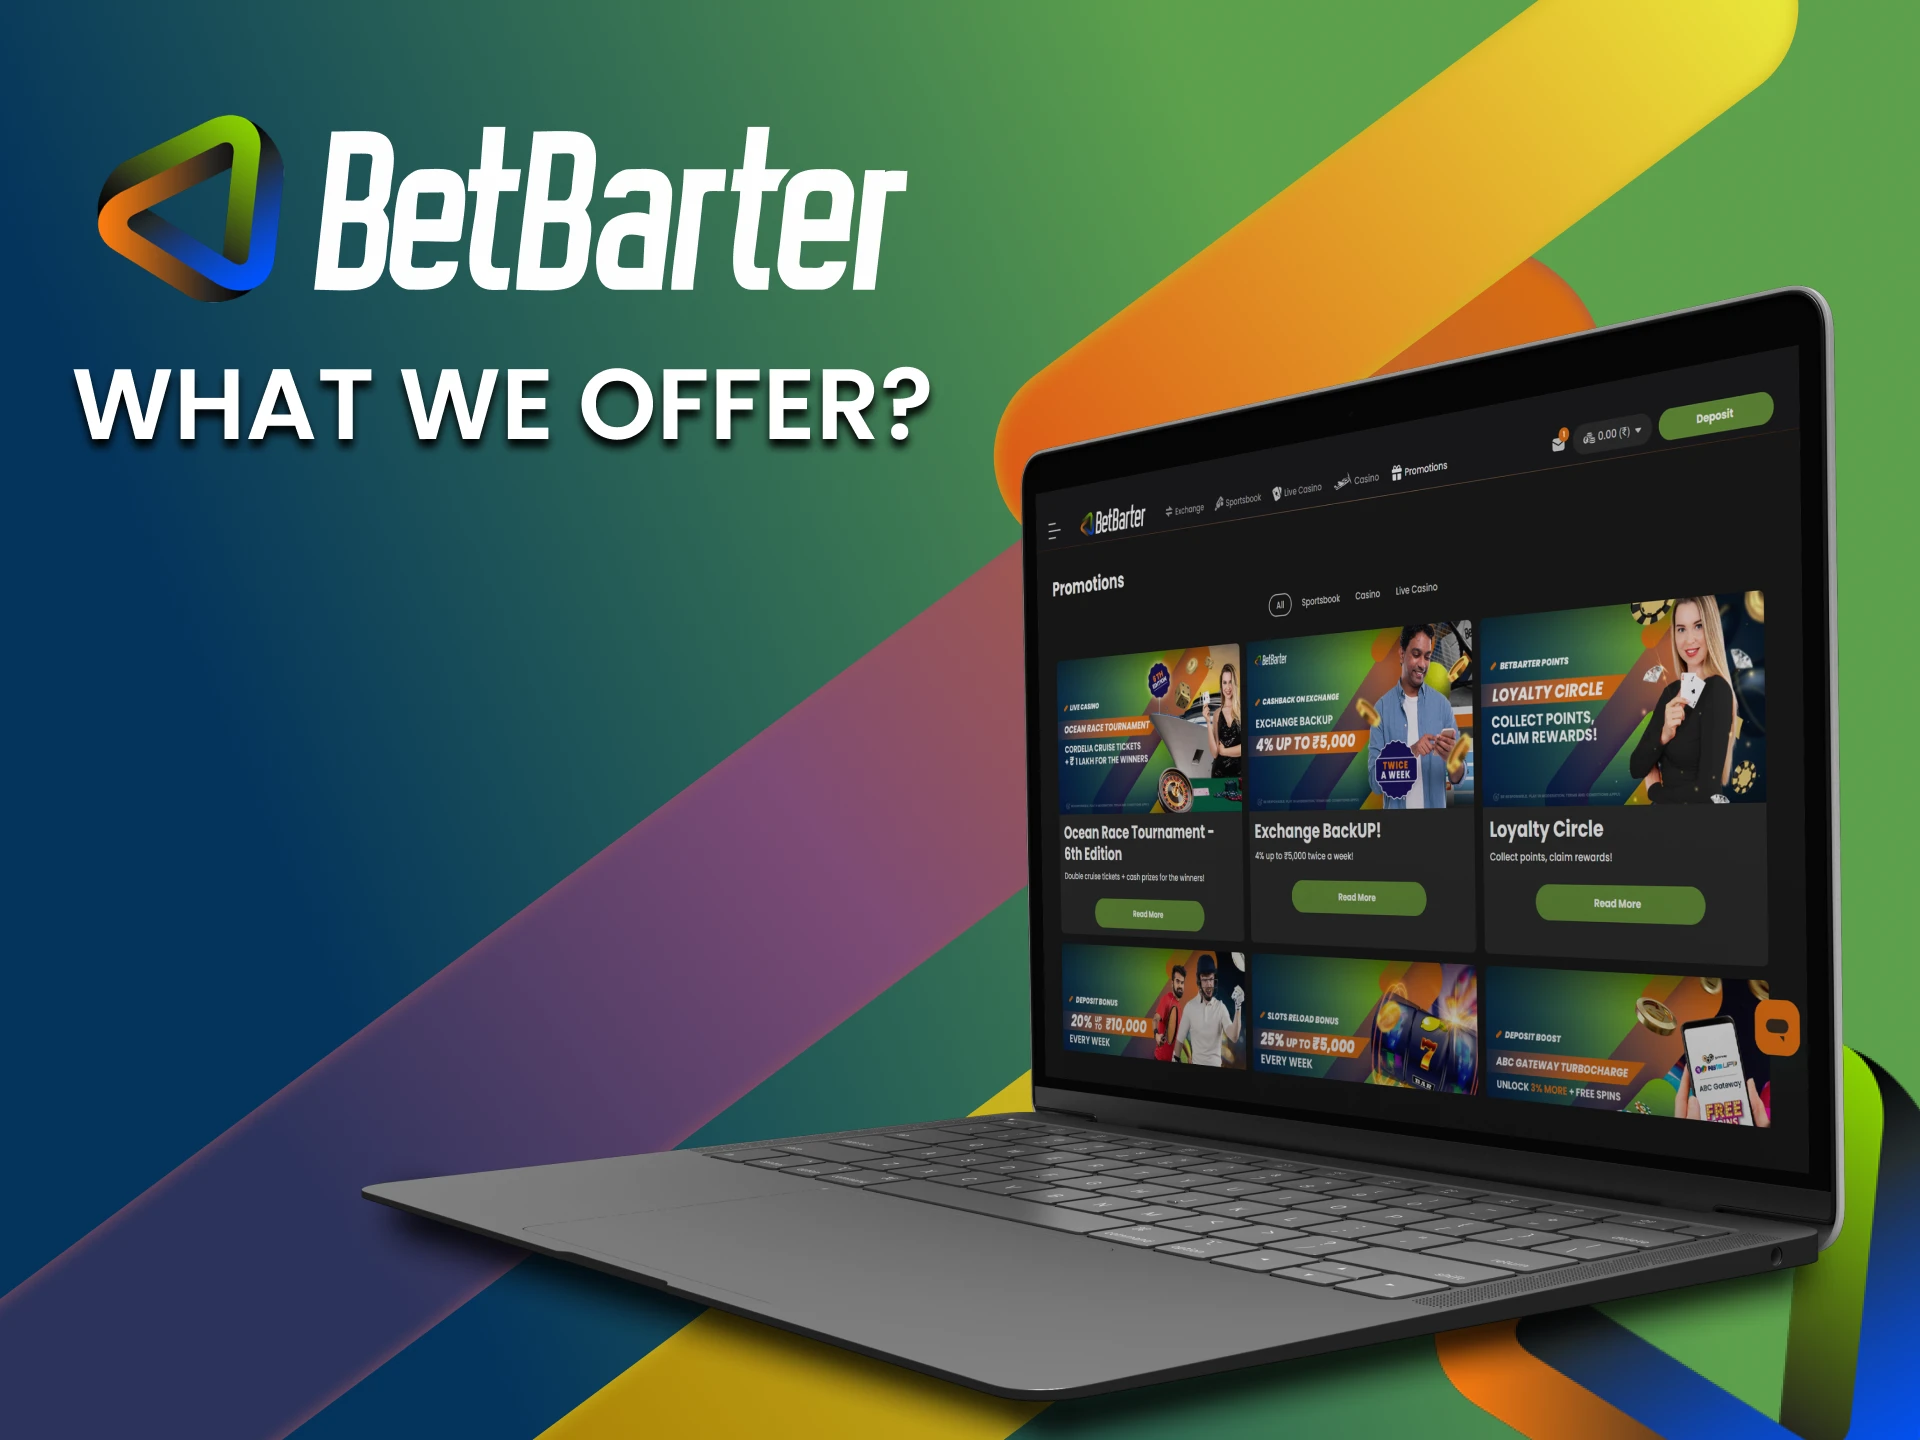 We will tell you what BetBarter has to offer its users.